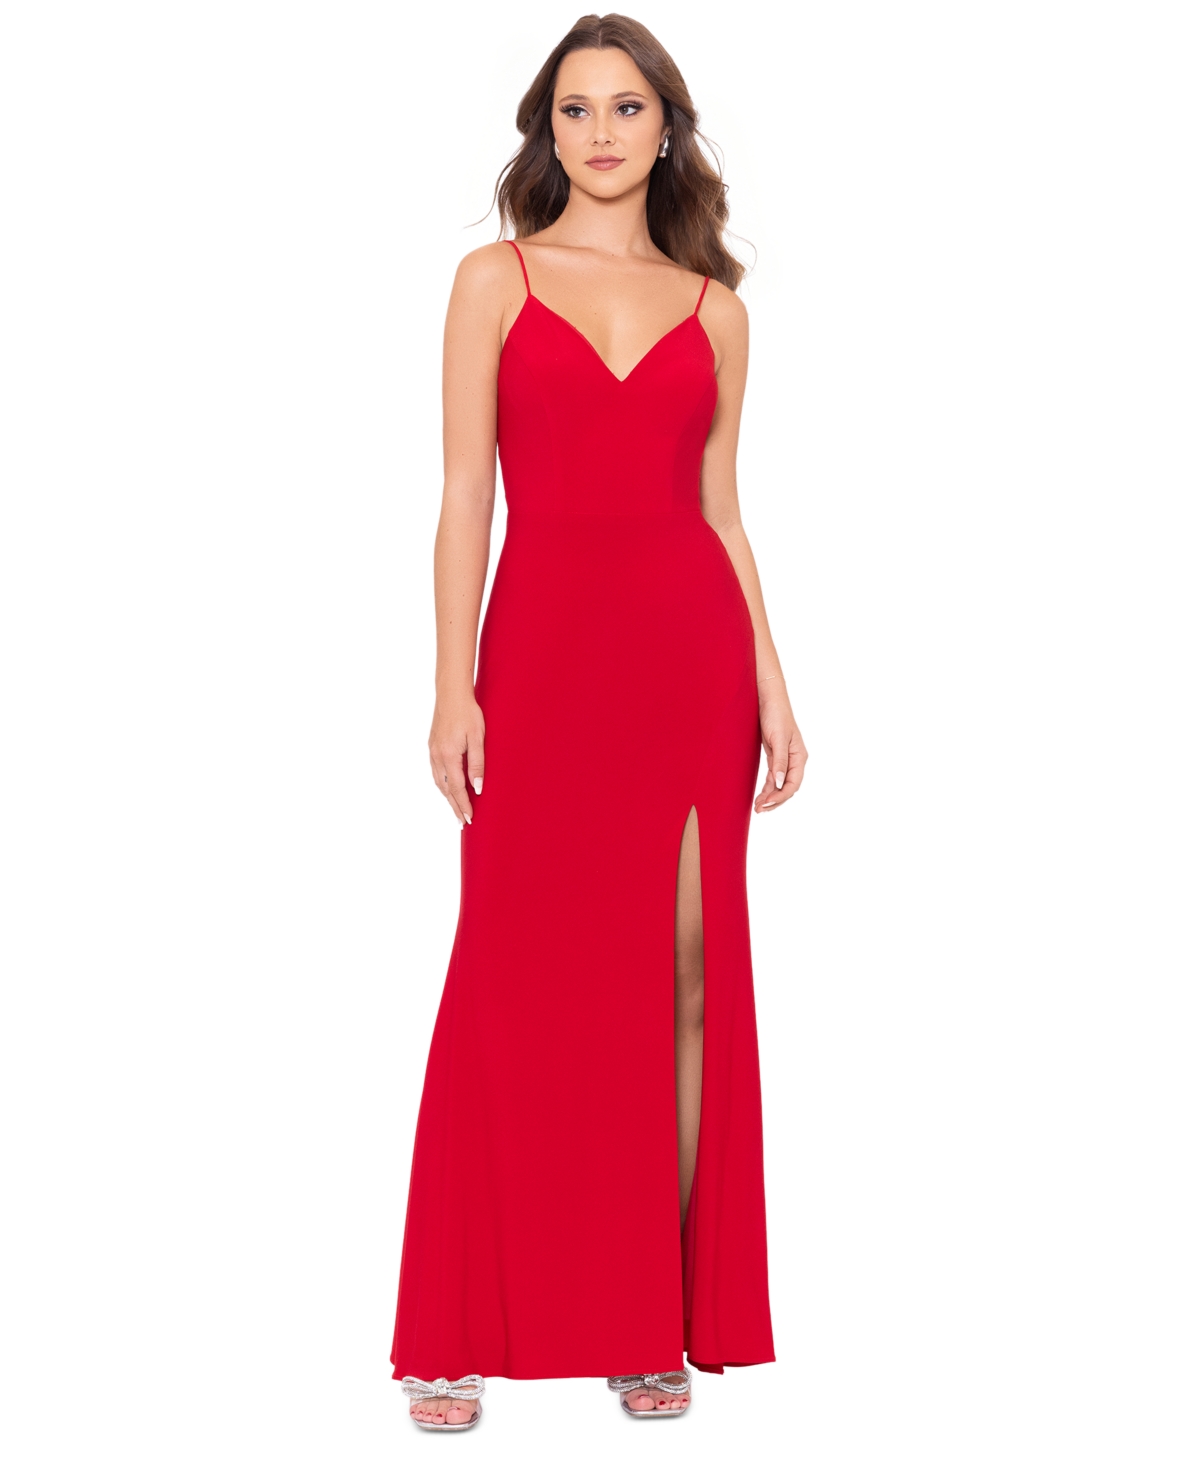 Women's Knot-Back Gown - Red